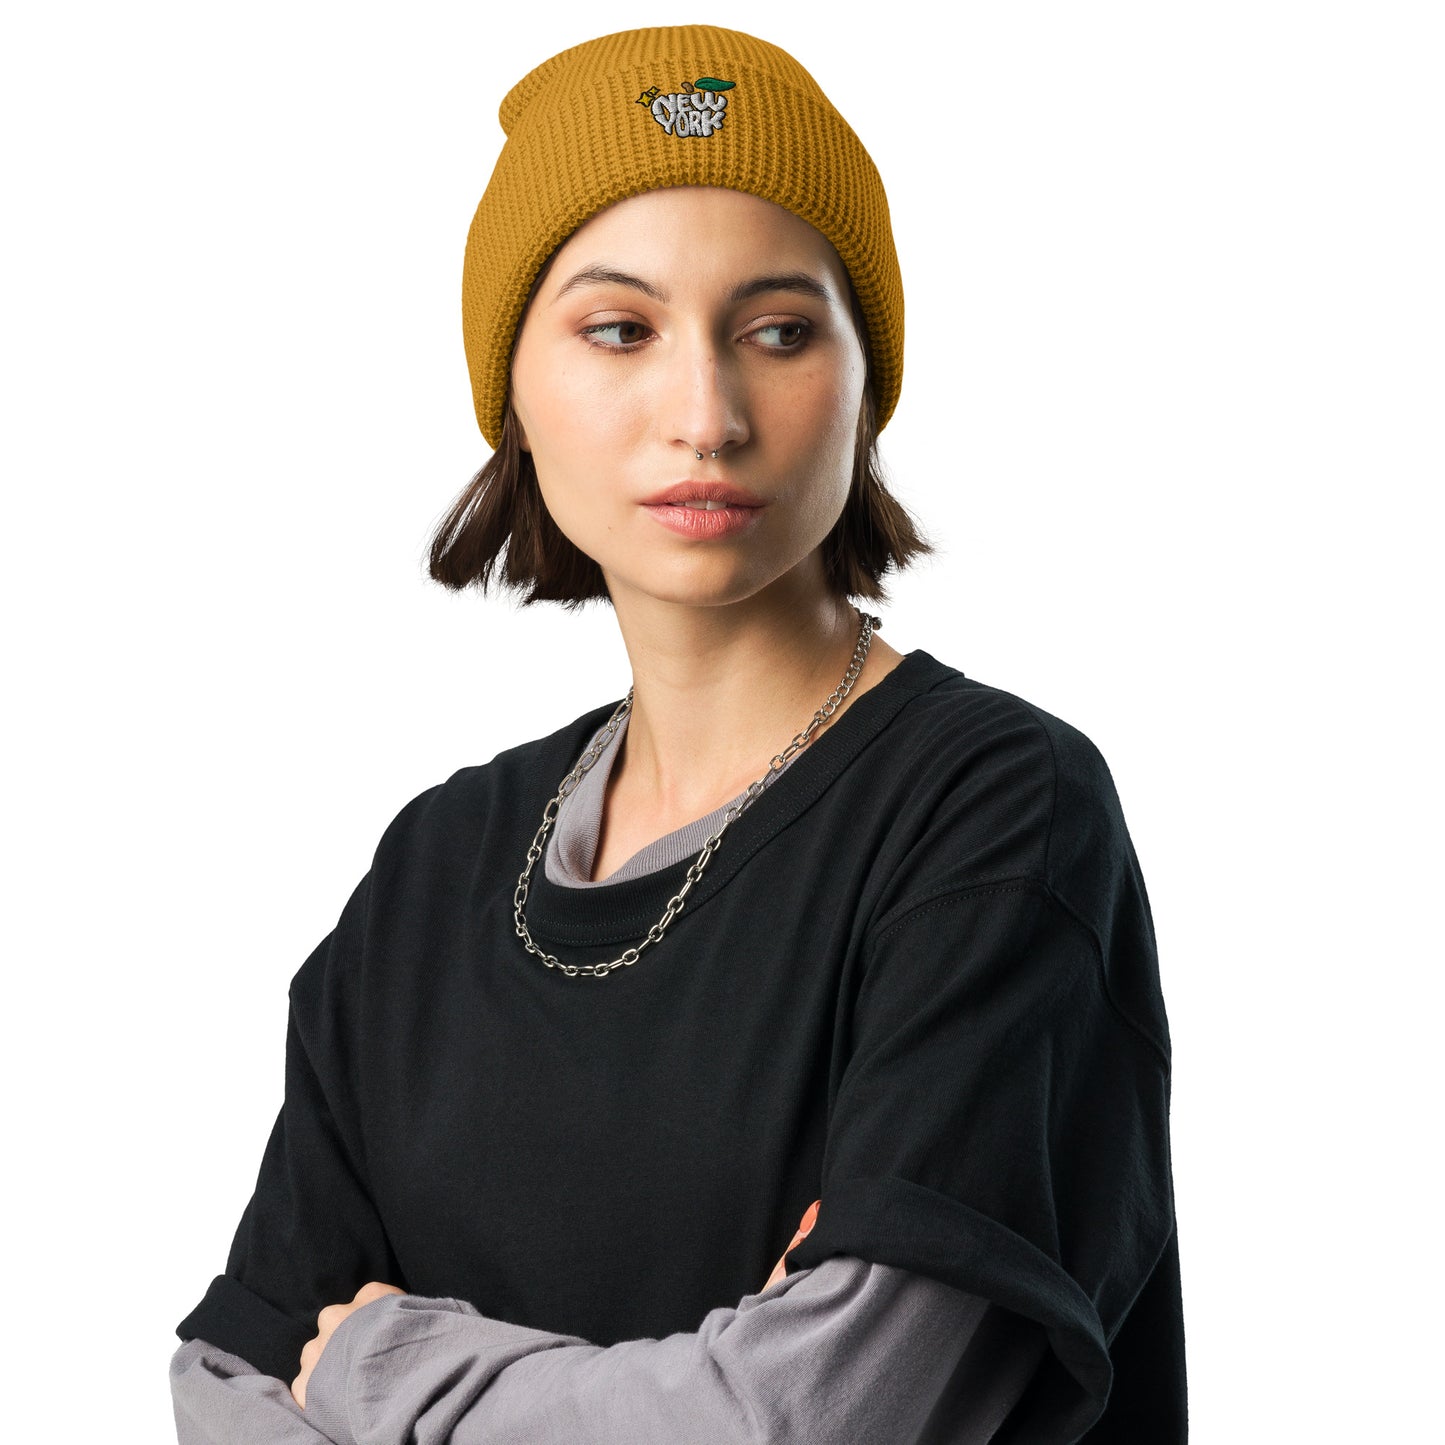 New York Apple Logo Embroidered Camel Yellow Waffle Beanie Hat Scattered Streetwear